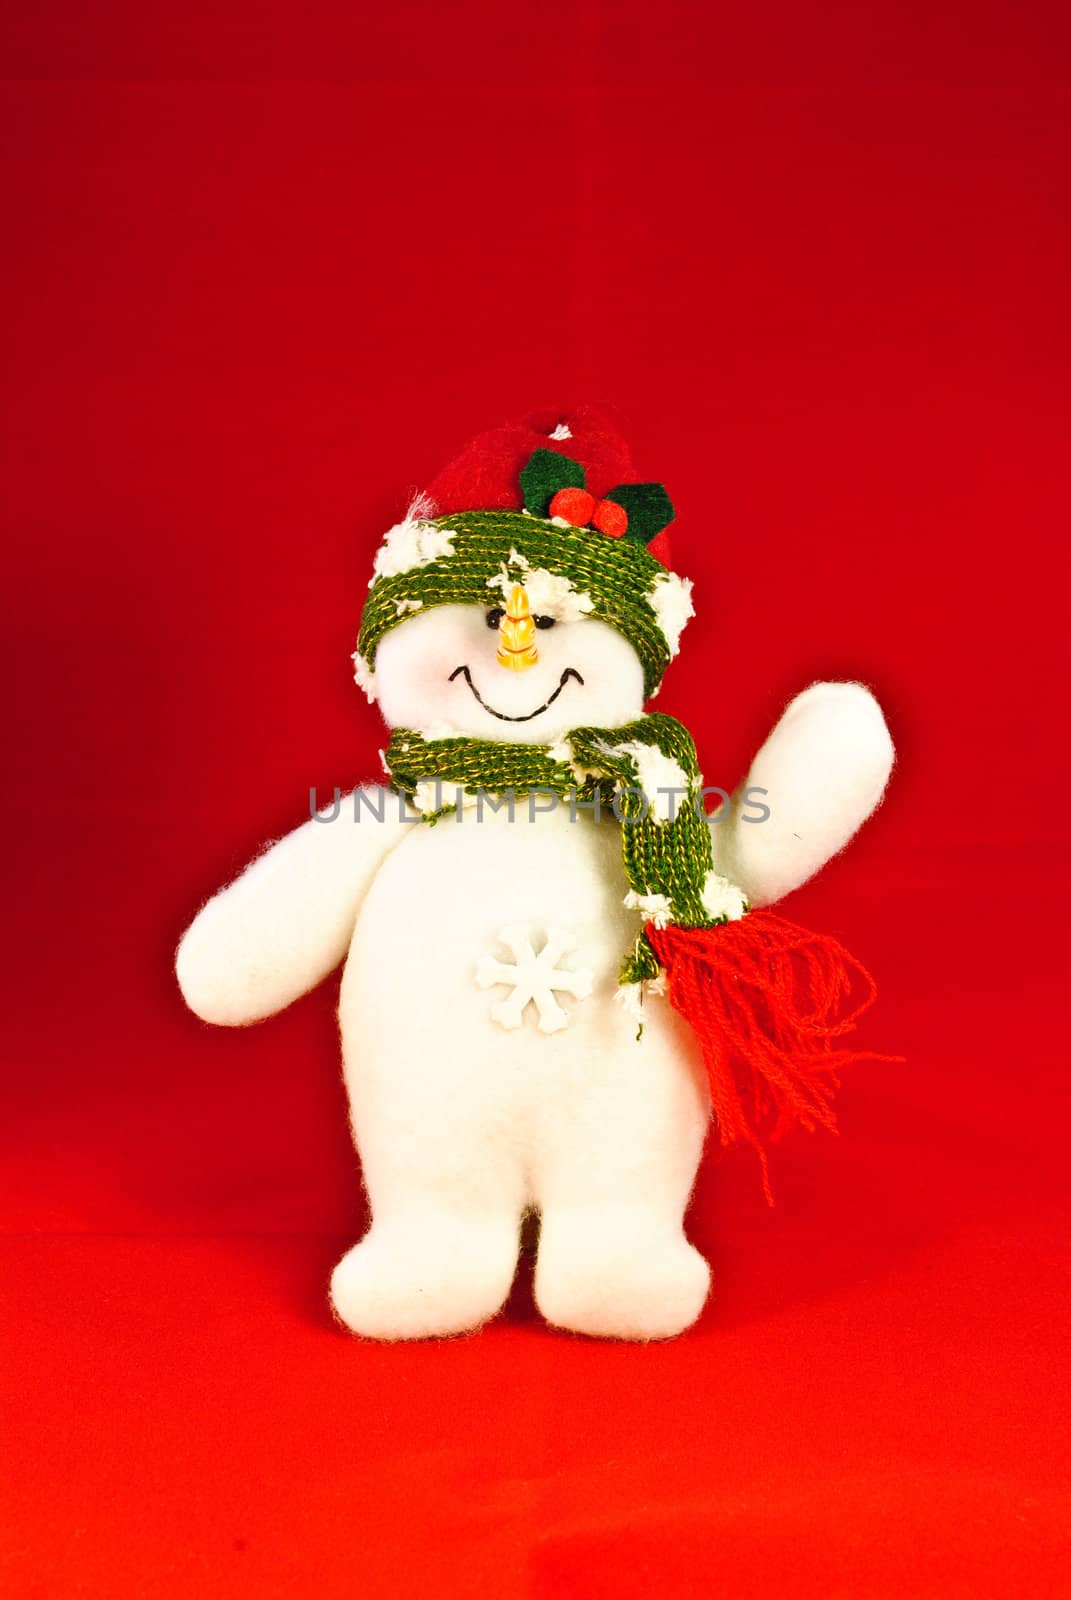 A toy snowman on a red background